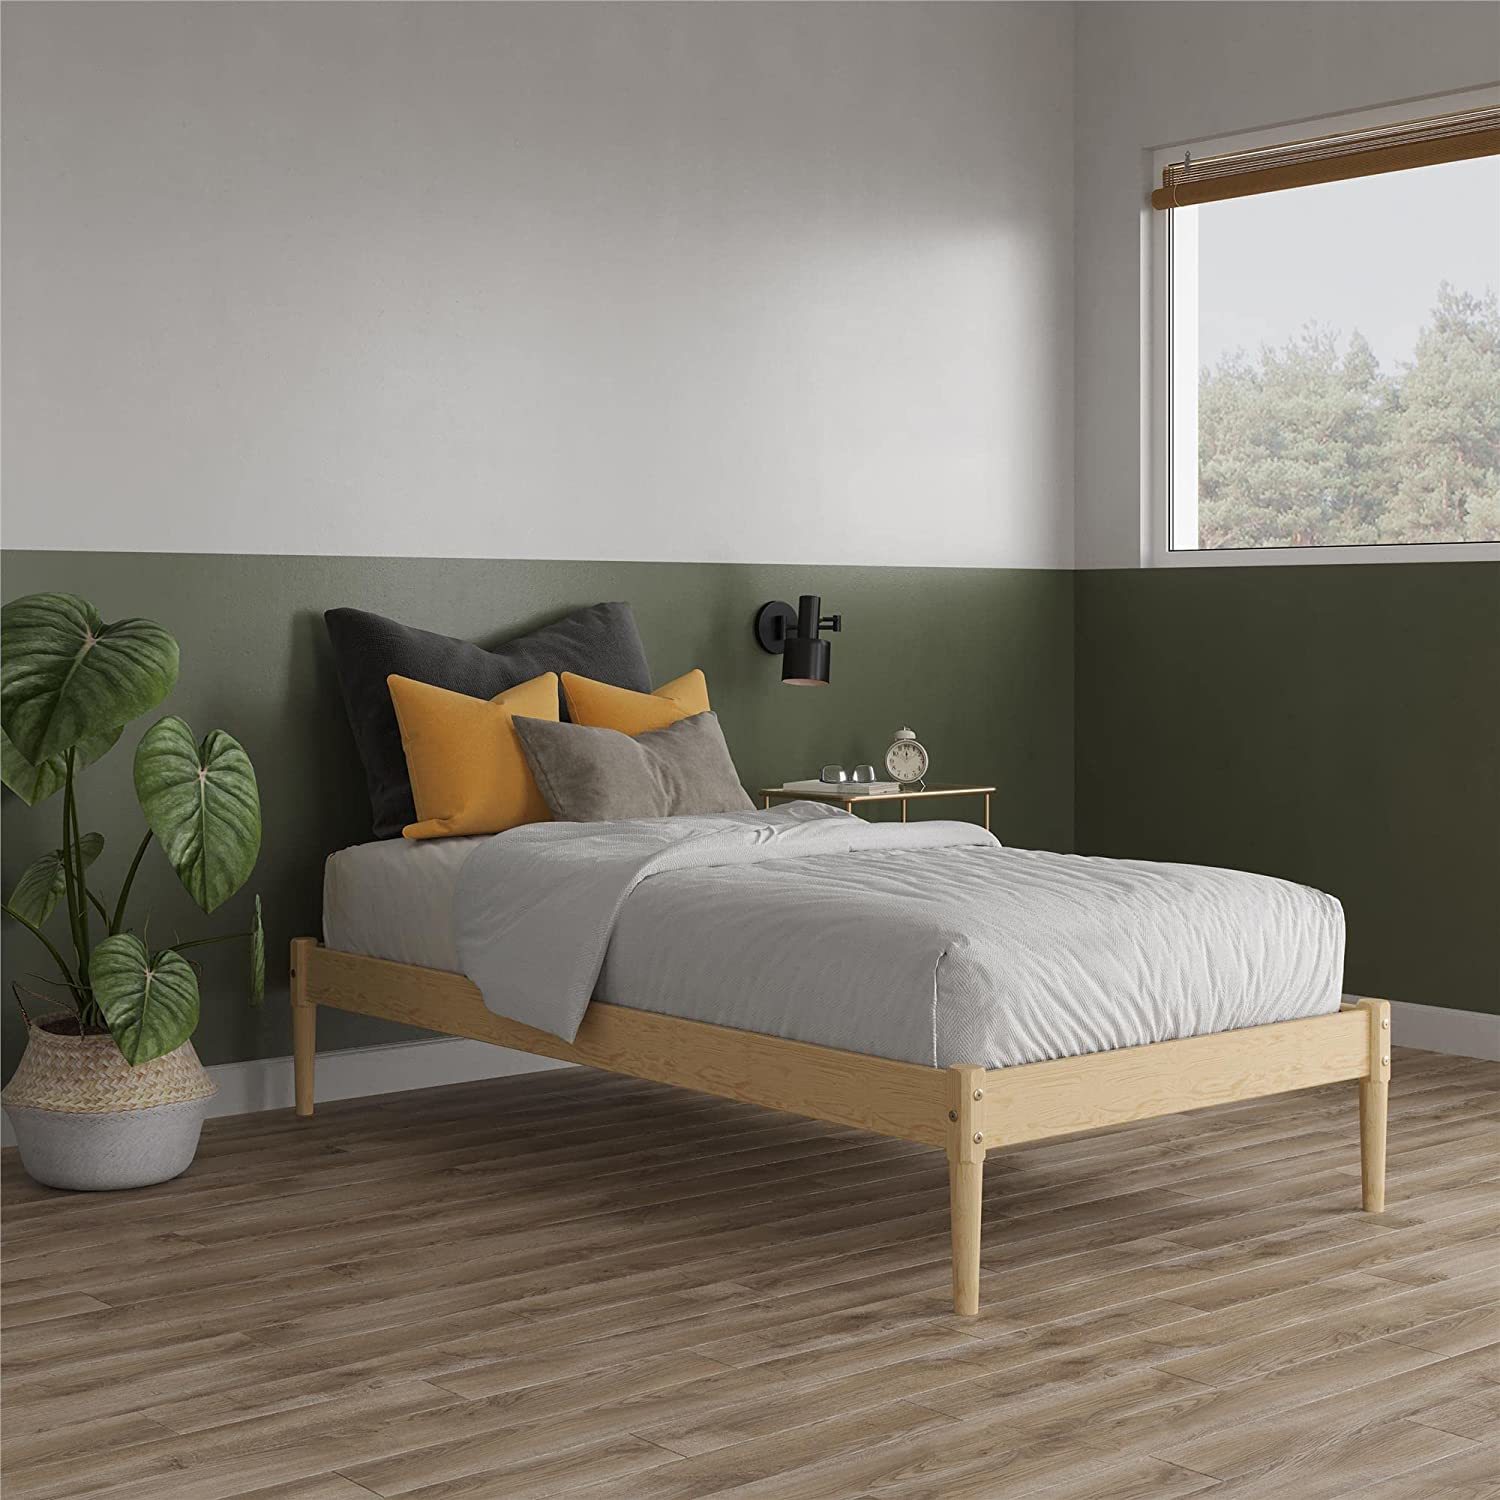 Twin-Size Dhp Lorriana 14" Solid Pine Wood Platform Bed Frame, Natural. - $0.00